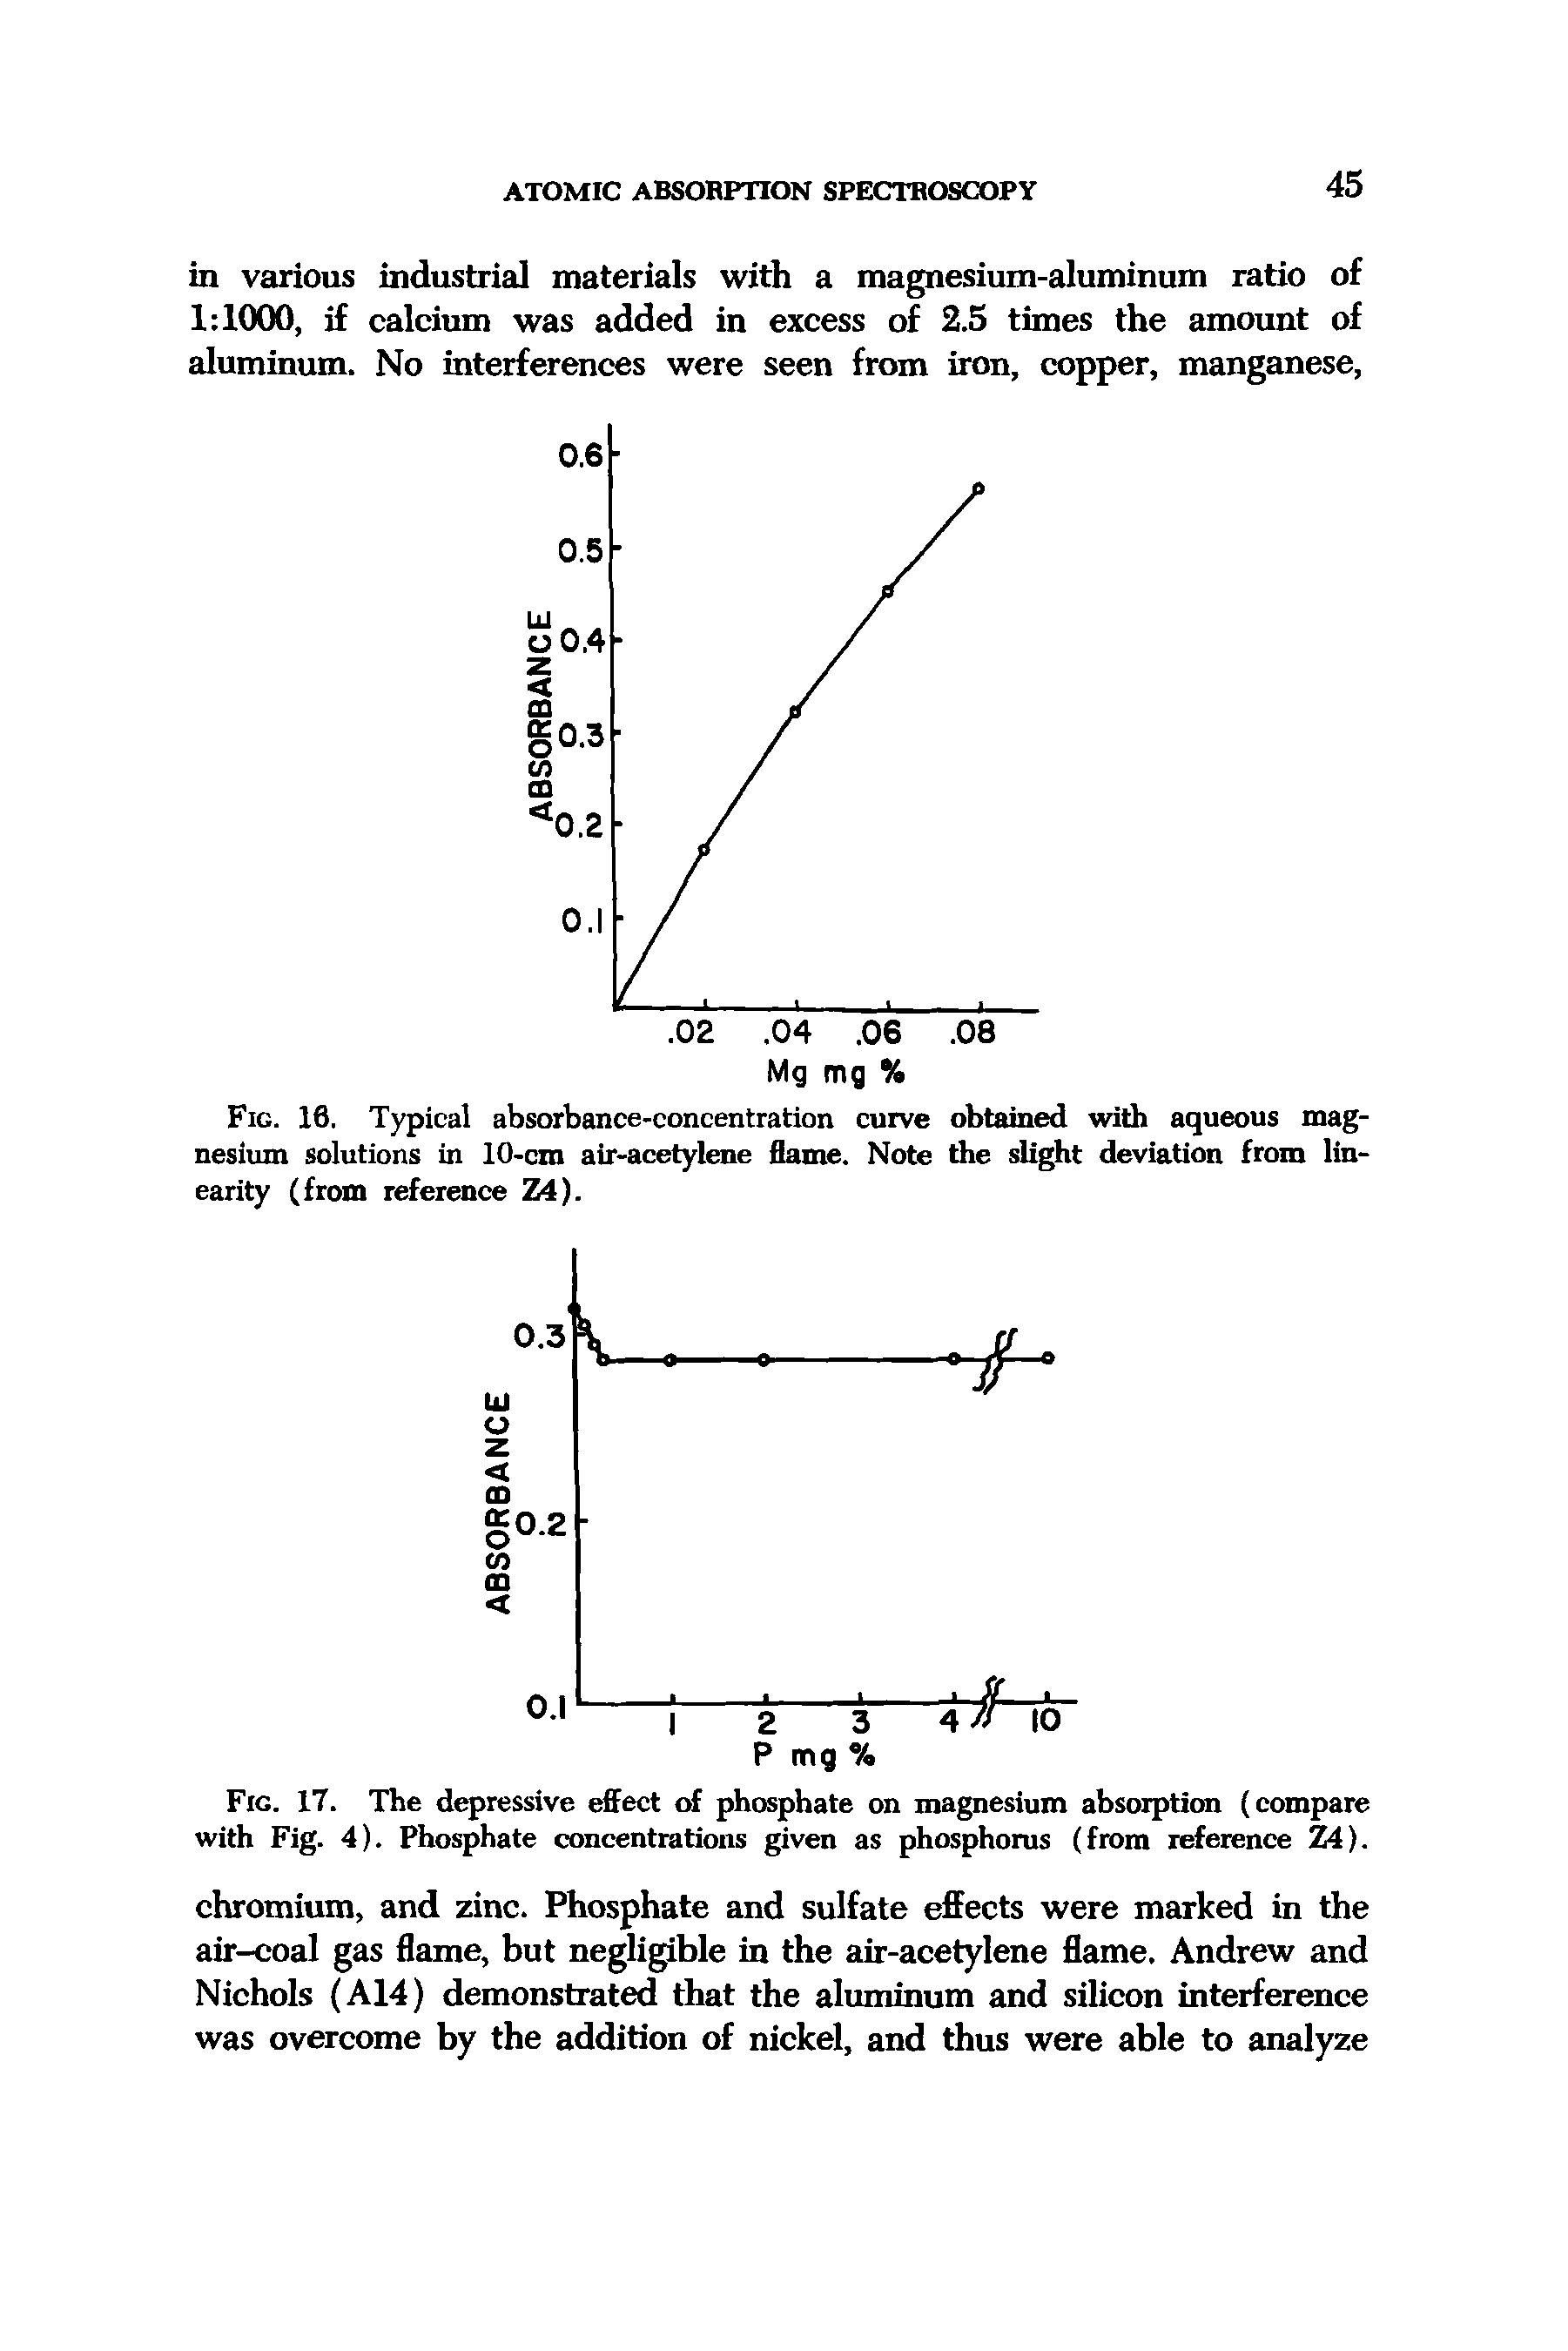 Fig. 17. The depressive effect of phosphate on magnesium absorption (compare with Fig. 4). Phosphate concentrations given as phosphorus (from reference Z4).